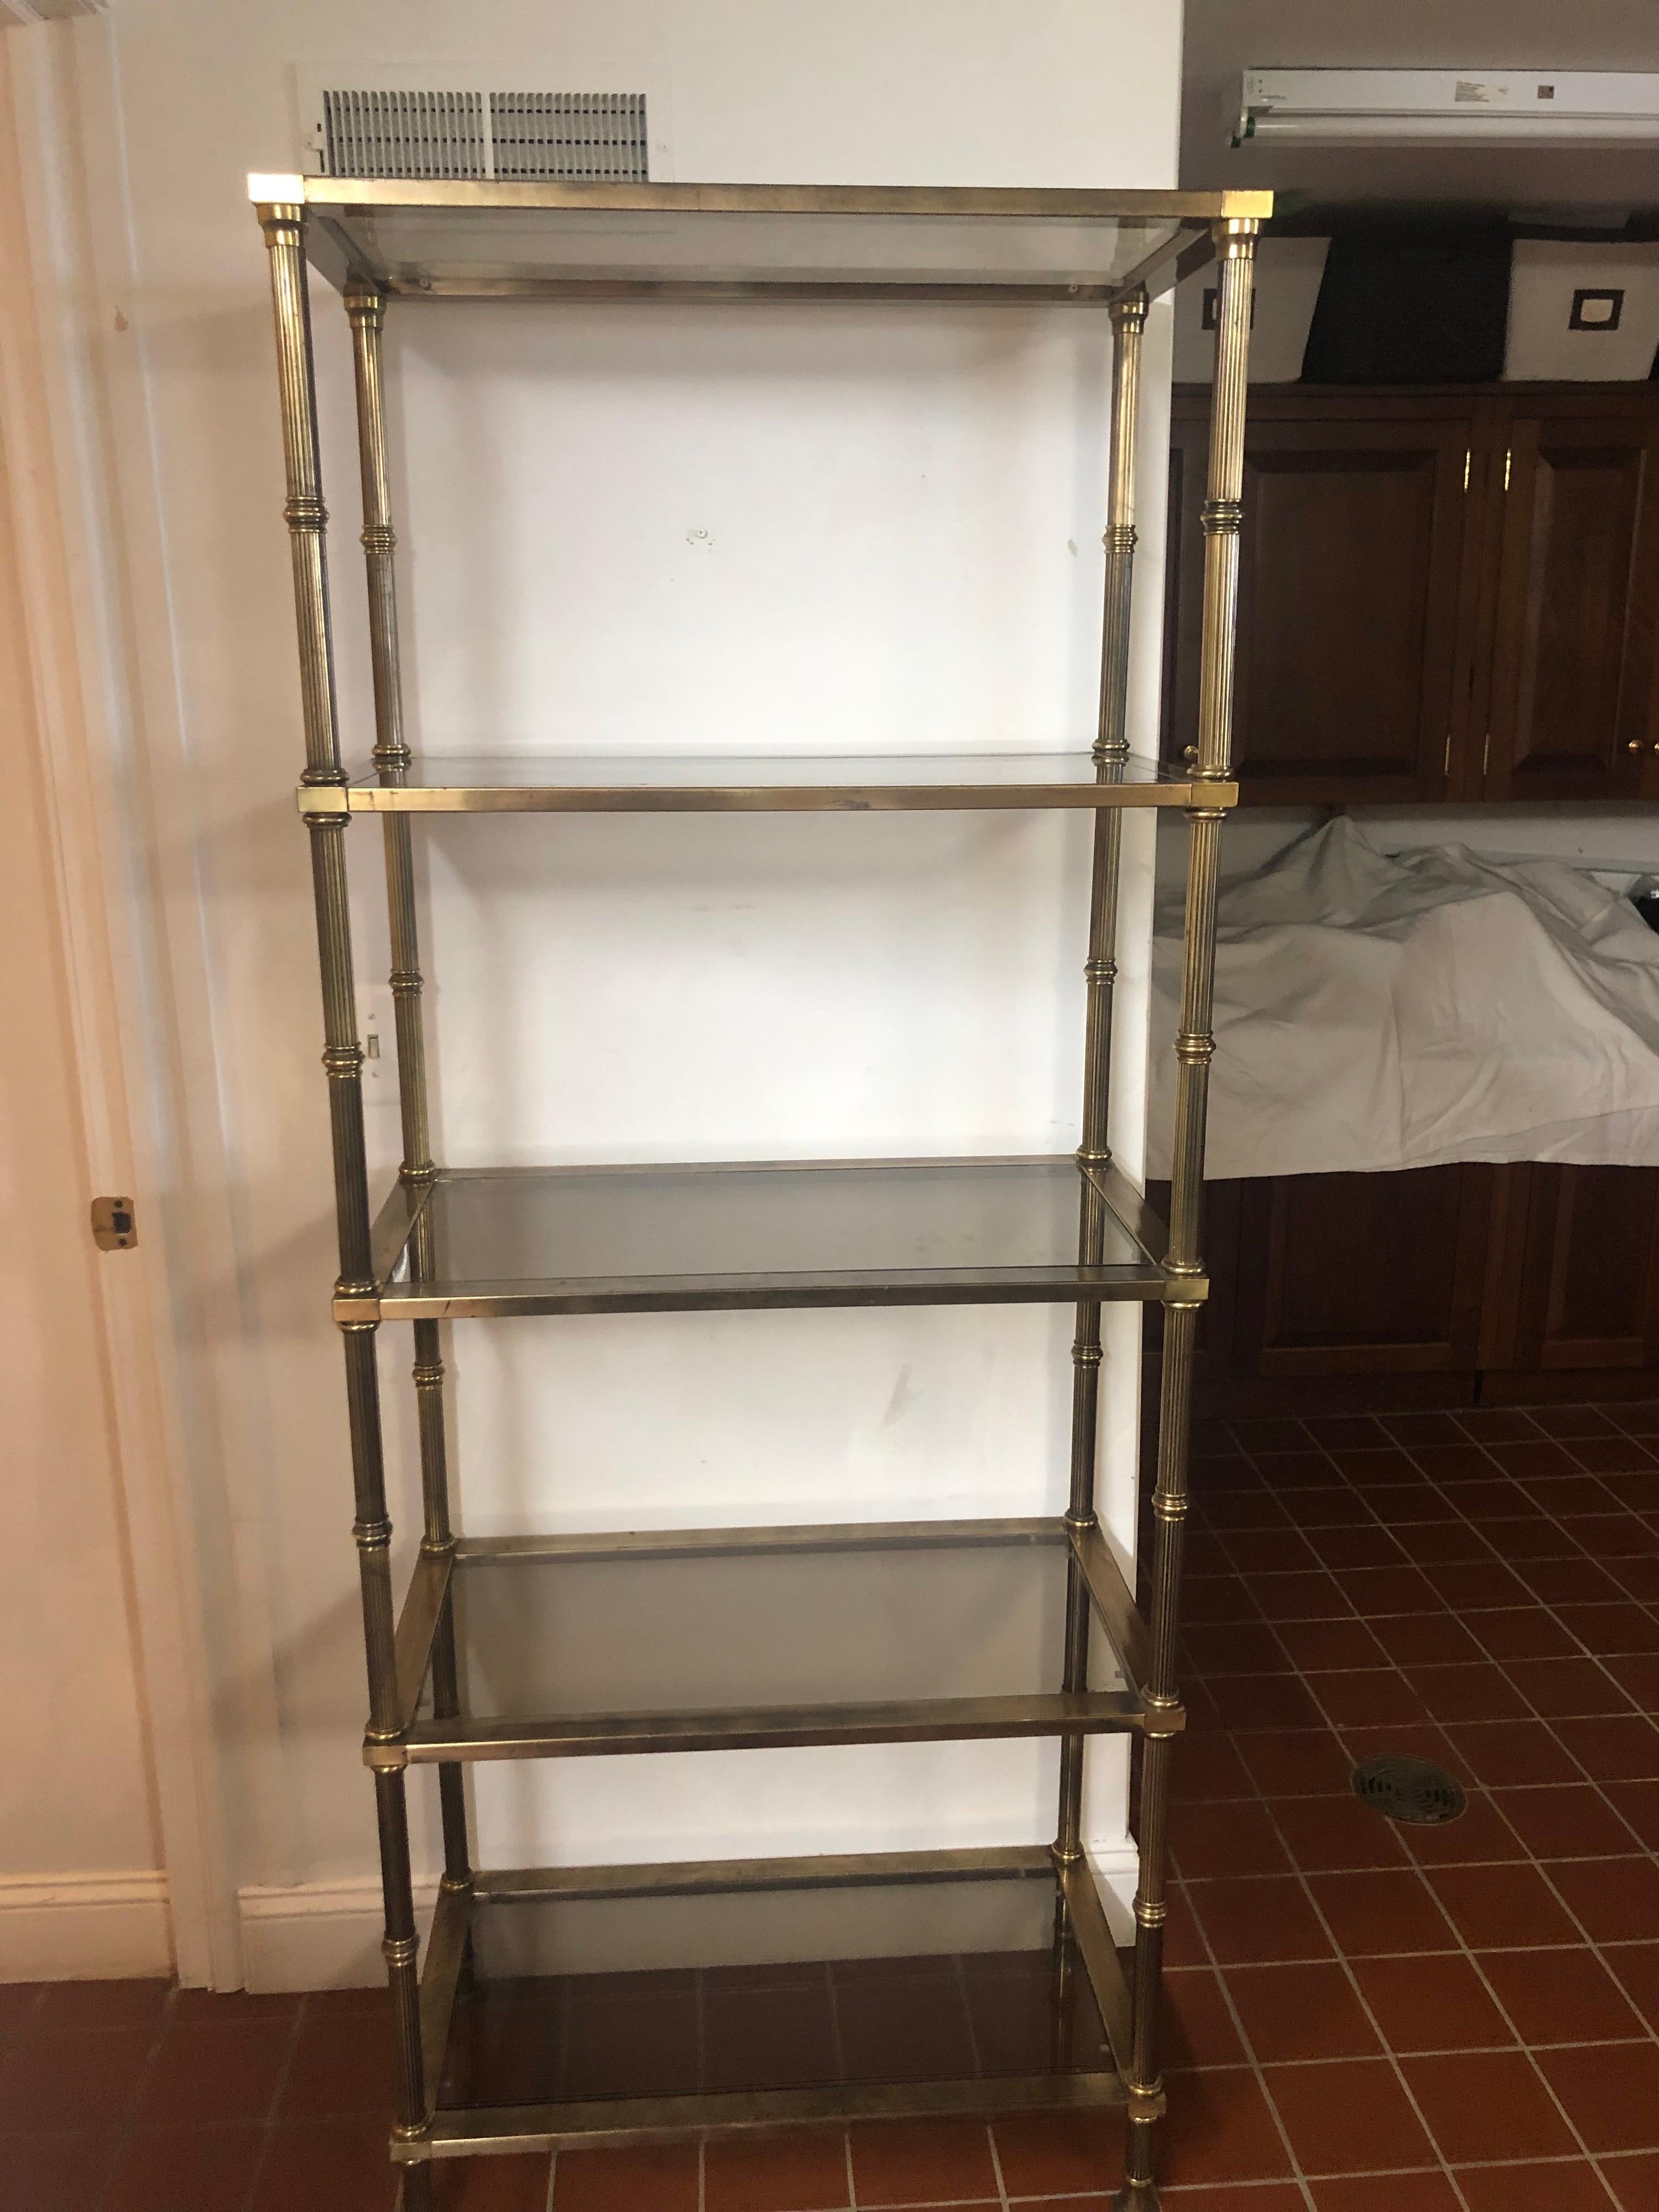 Hollywood Regency brass and smoked glass Etagere .
Classic timesless design. Consists of 5 shelves with removeable smoked beveled glass. Perfect to house your books and collectibles. Reeded columned sides give it a traditional corinthian feel. This